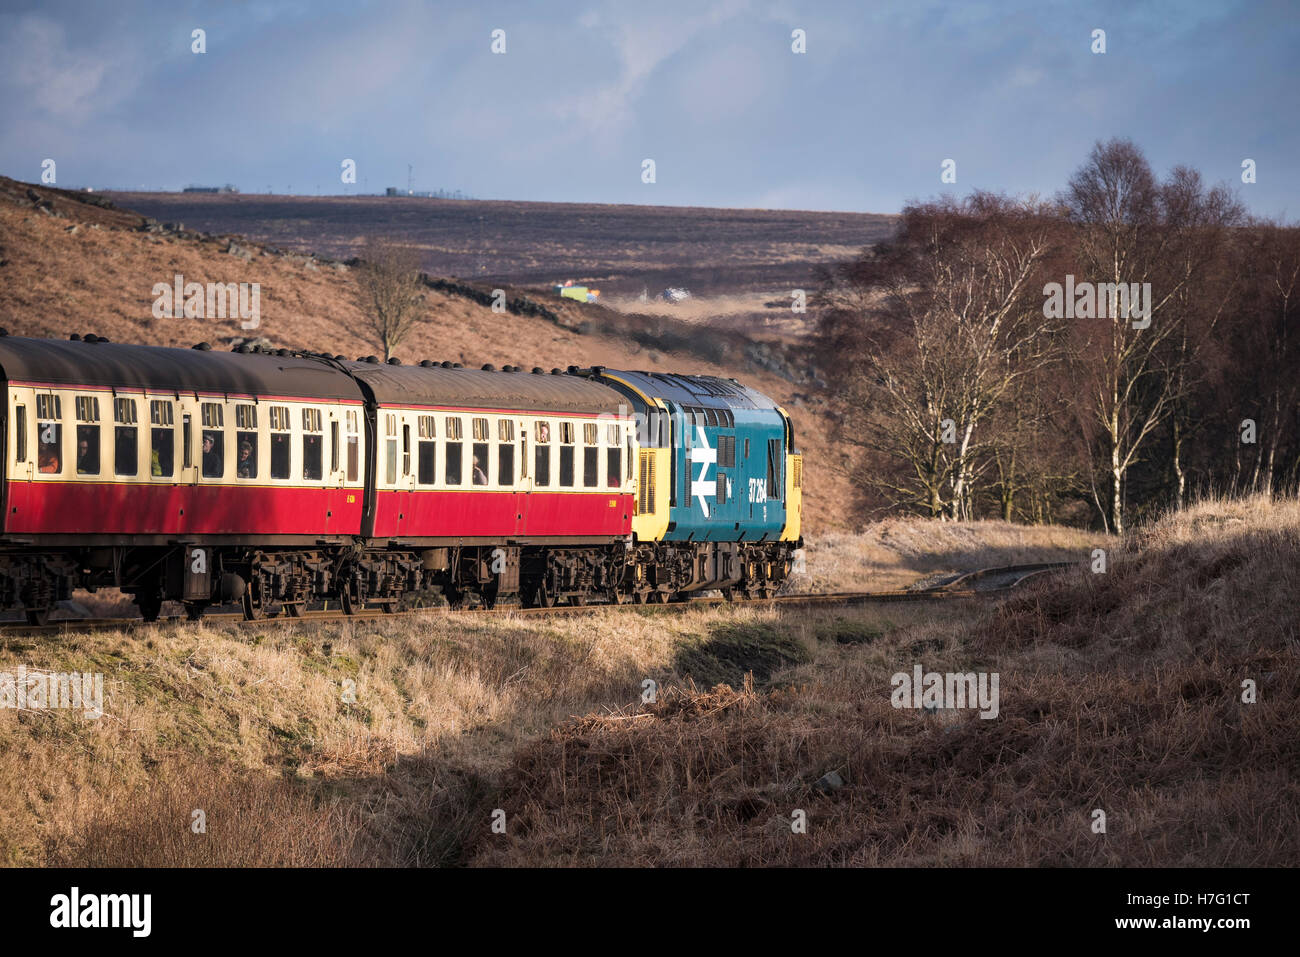 BR Class 37 'Co-Co' No. 37264 diesel locomotive train traveling on the tracks of the North Yorkshire Moors Railway, GB, UK. Stock Photo